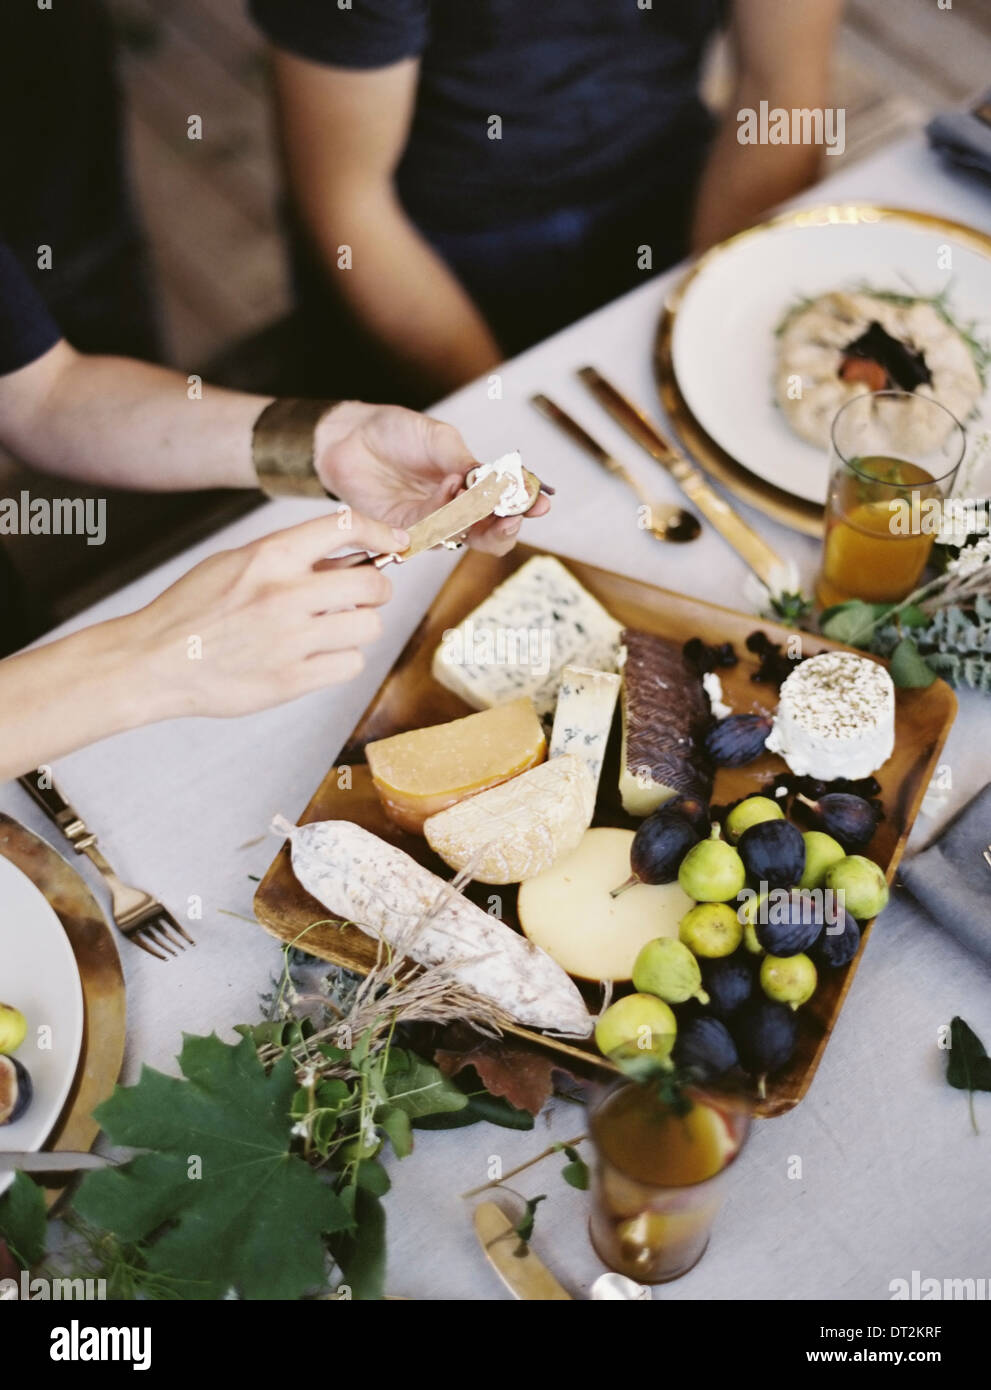 A table white cloth place settings An organic cheese board with soft and hard cheeses and figs Two people sitting at the table Stock Photo